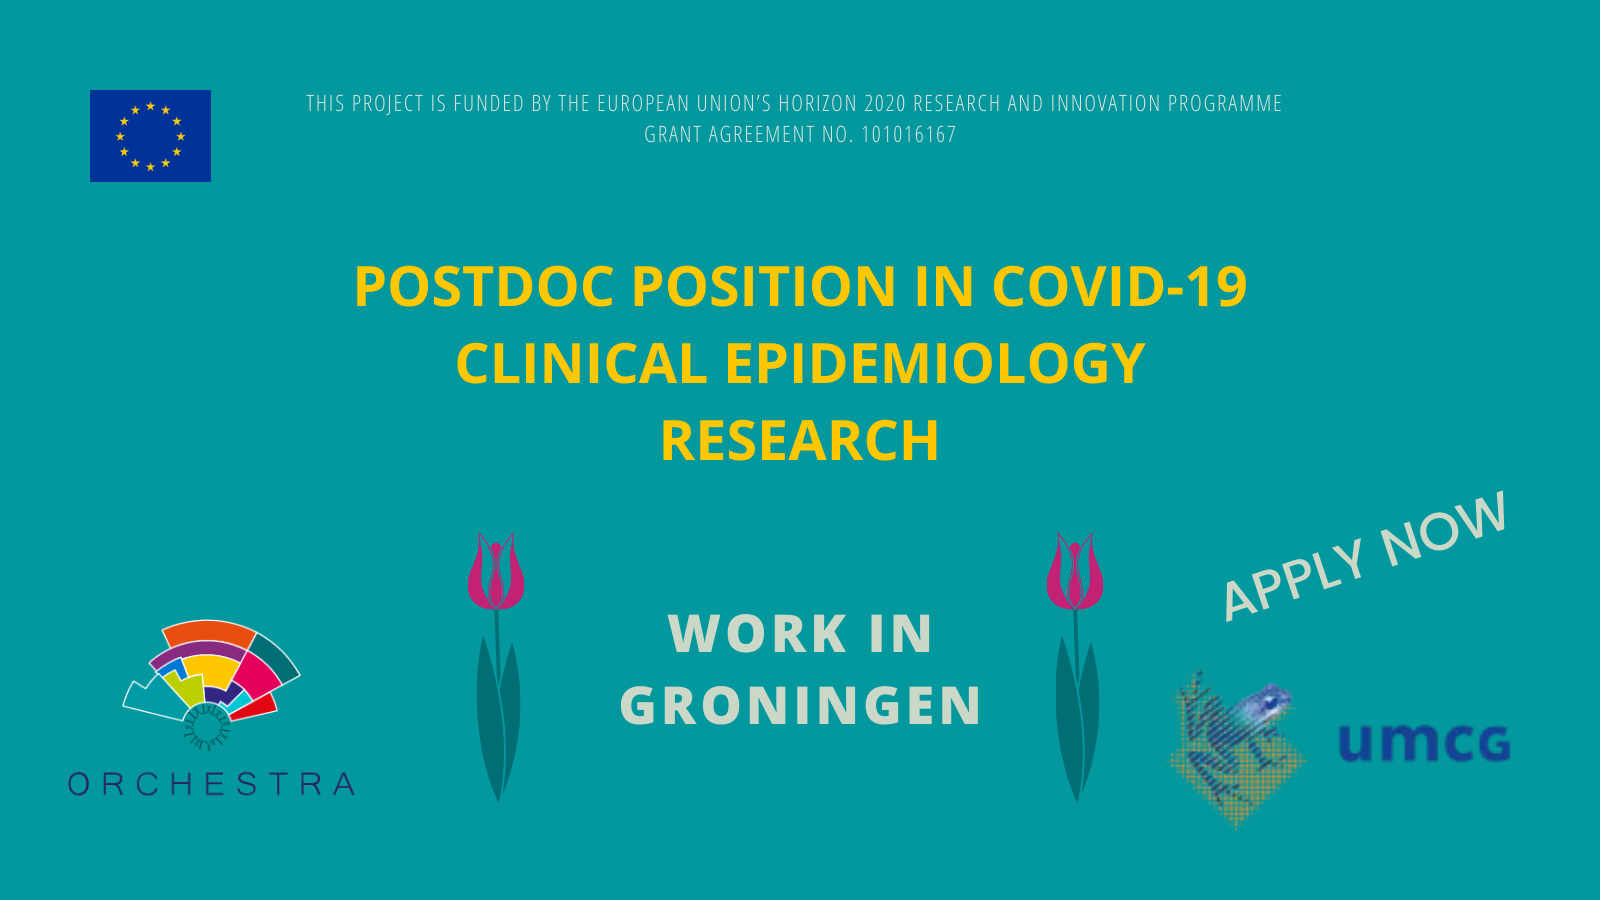 We are hiring: Postdoc position in COVID-19 clinical epidemiology research